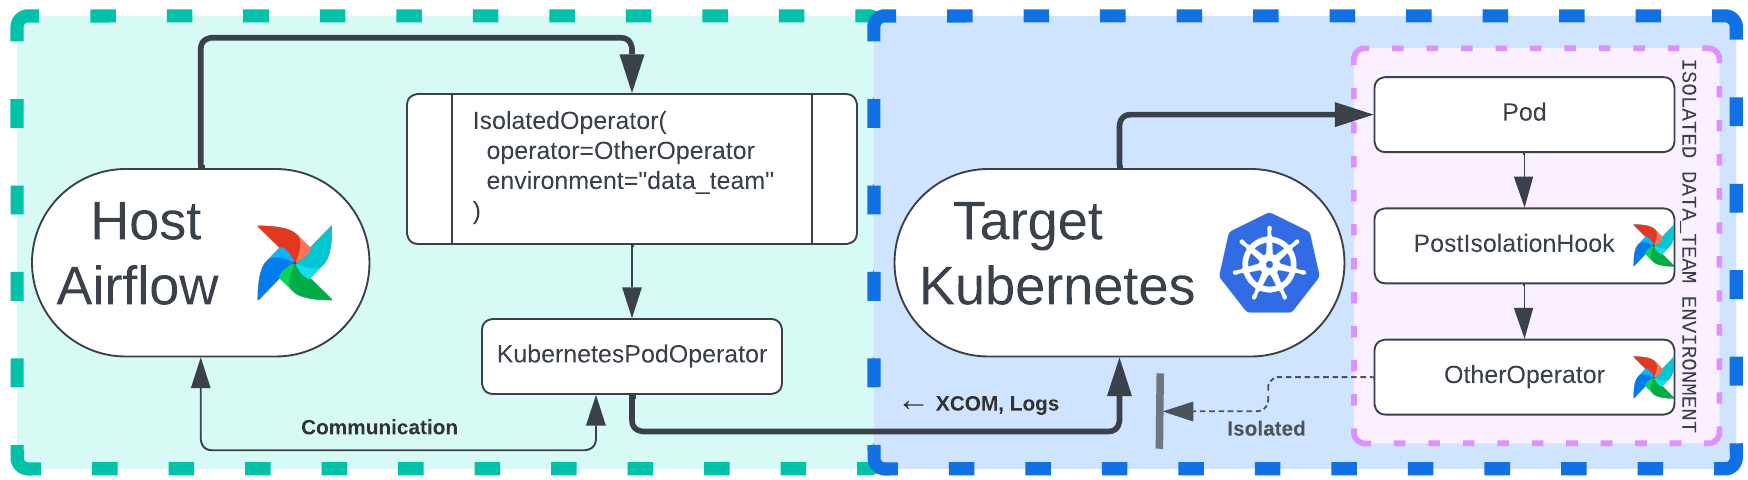 A diagram documenting the flow from IsolatedOperator to KubernetesPodOperator to a pod to PostIsolationHook to OtherOperator